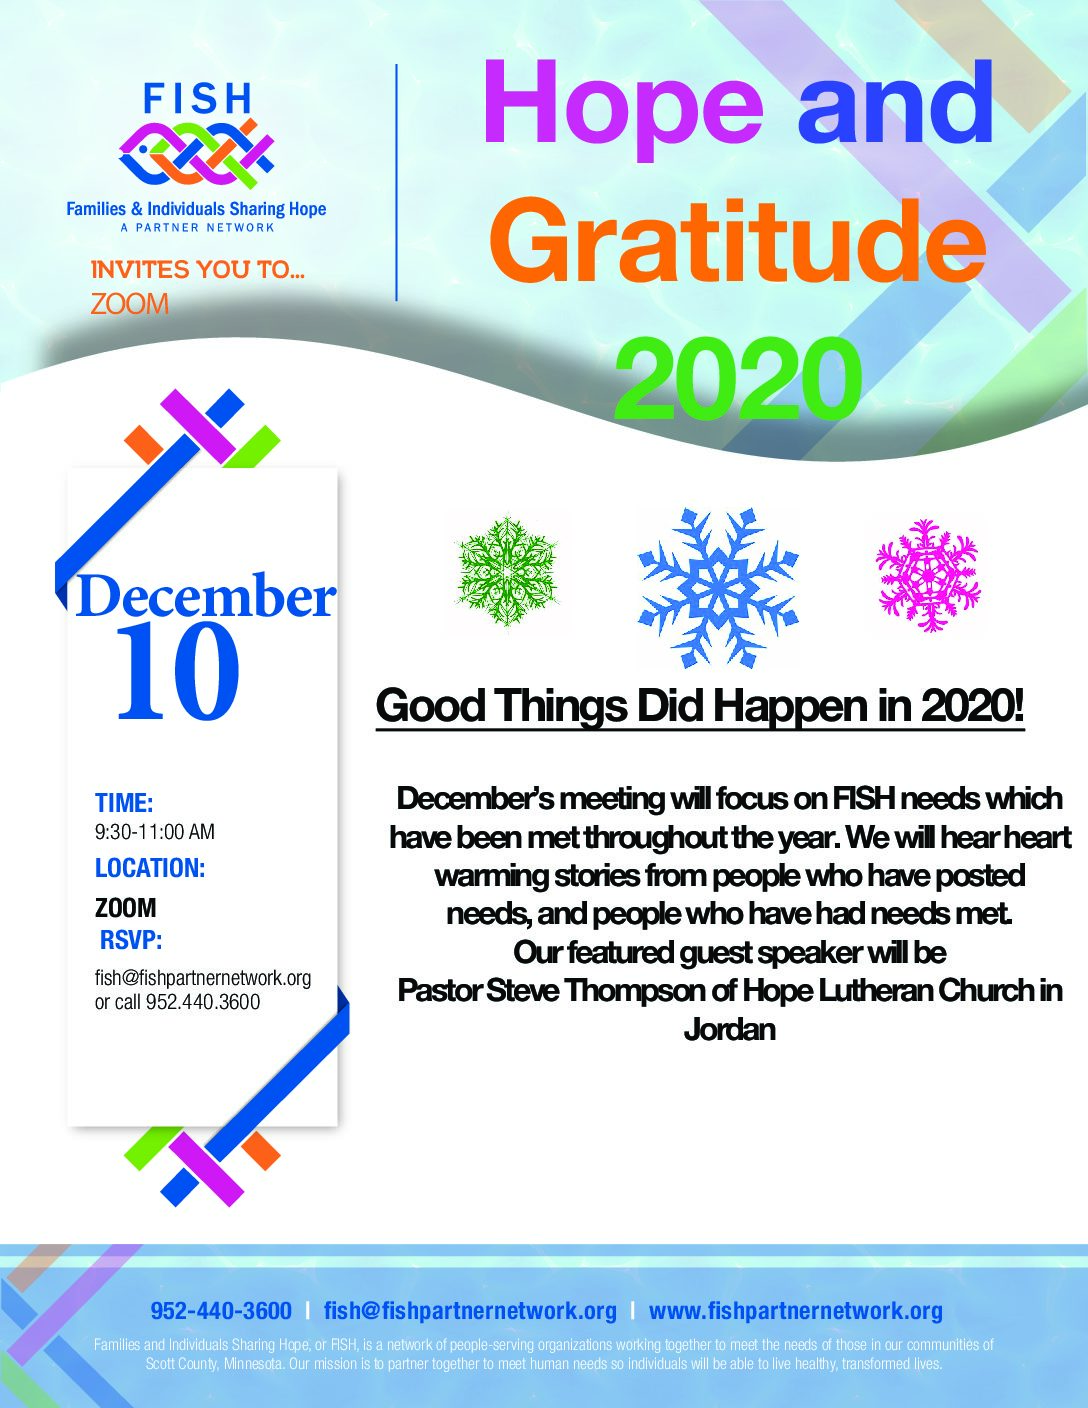 Hope and Gratitude – FISH 2nd Thursday Meeting on December 10!